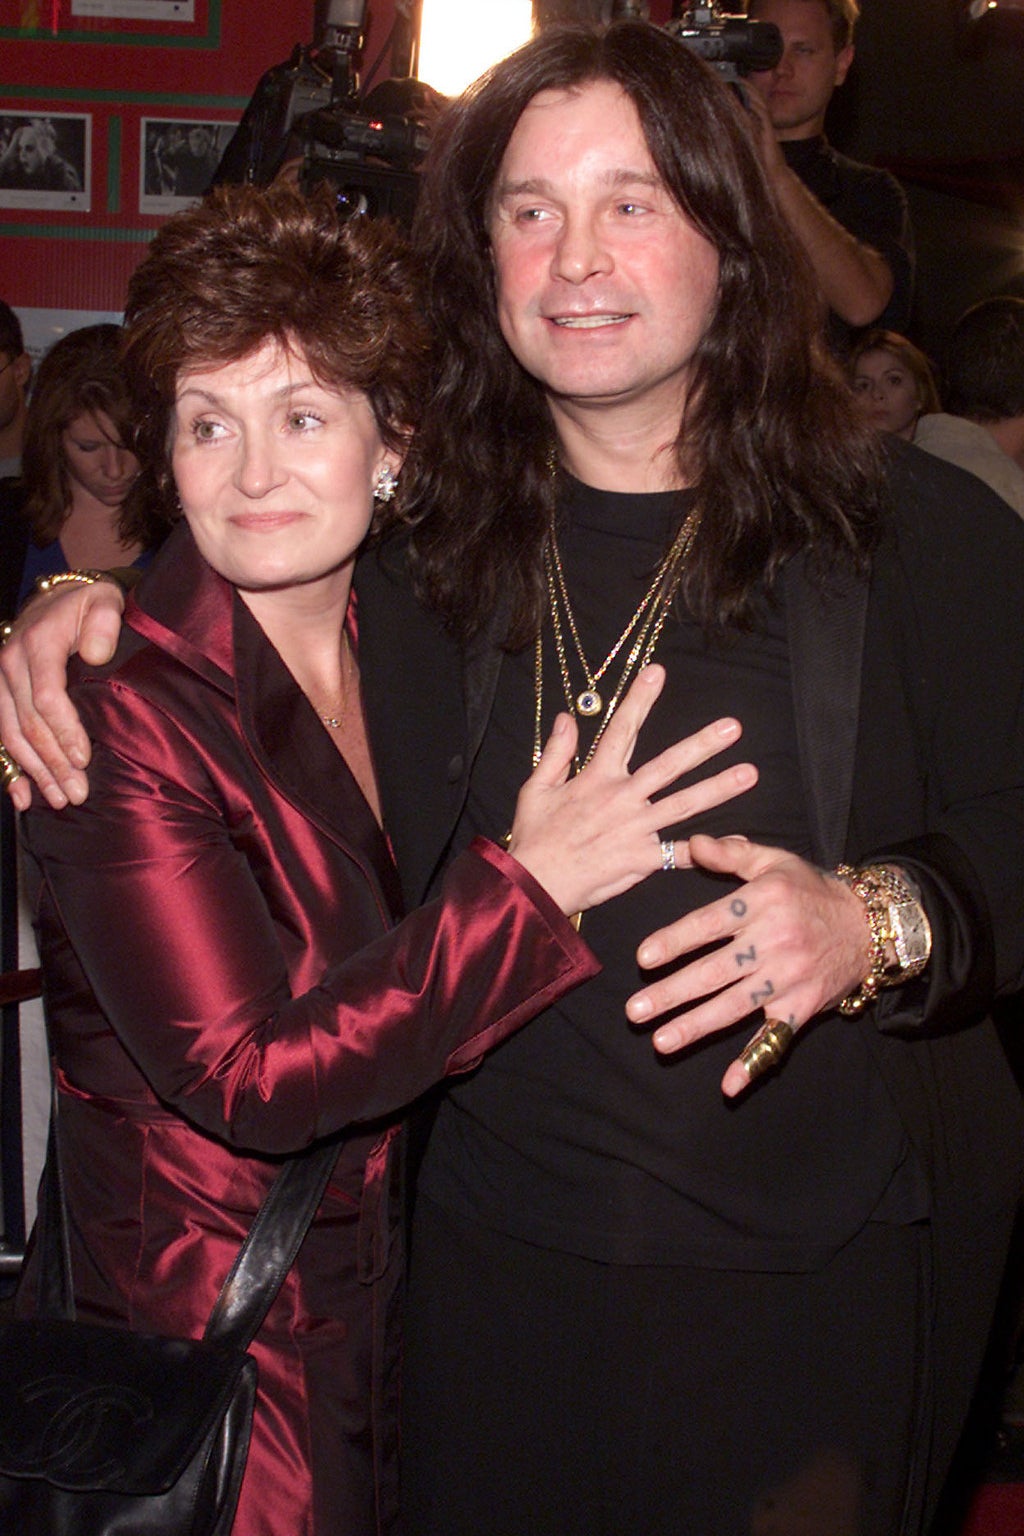 The couple in 2000.